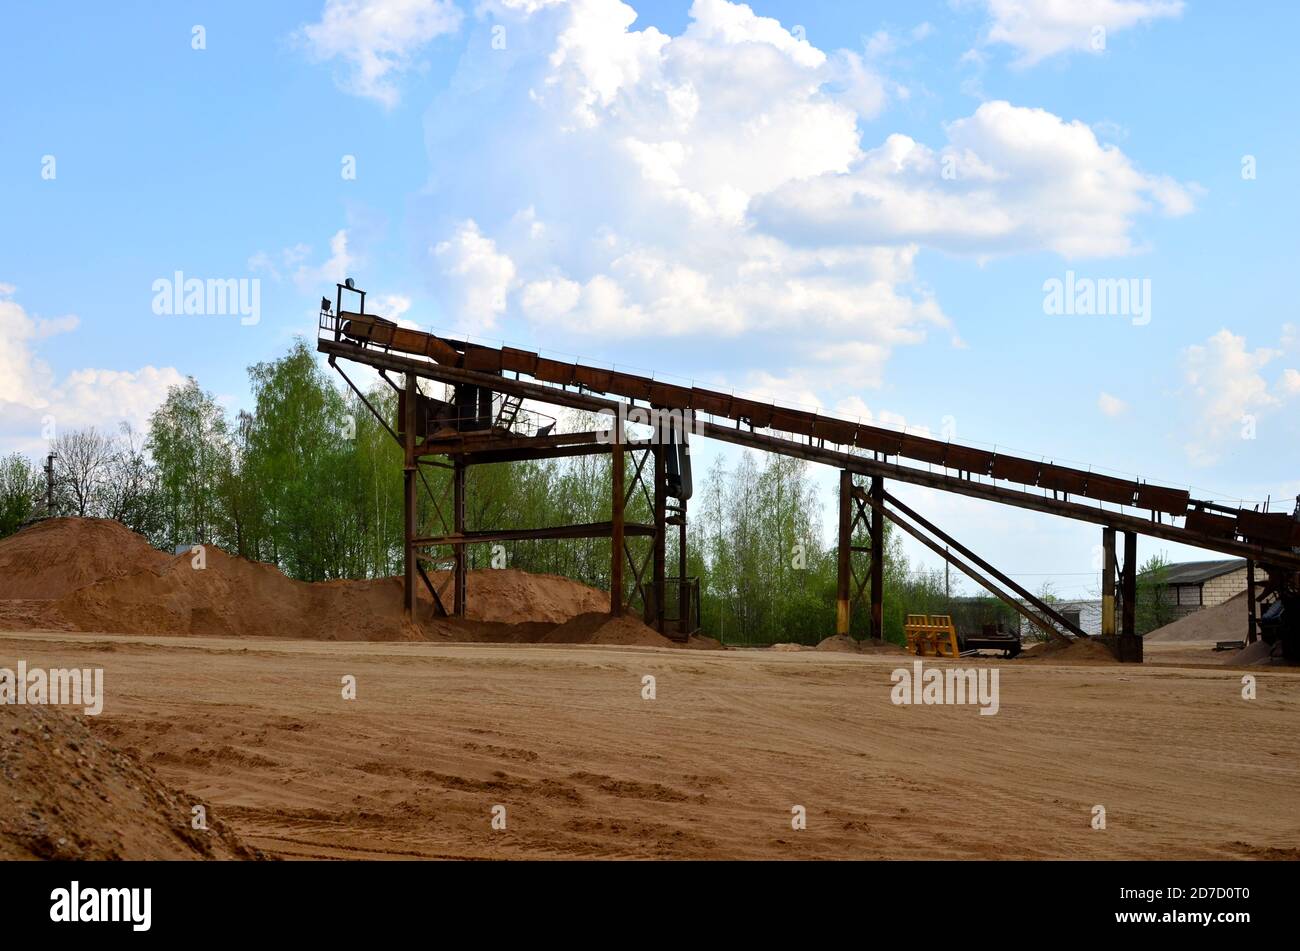 Sand making plant in mining quarry. Crushing factory with production line for crushing, grinding stone, sorting sand and bulk materials. Sand washing Stock Photo